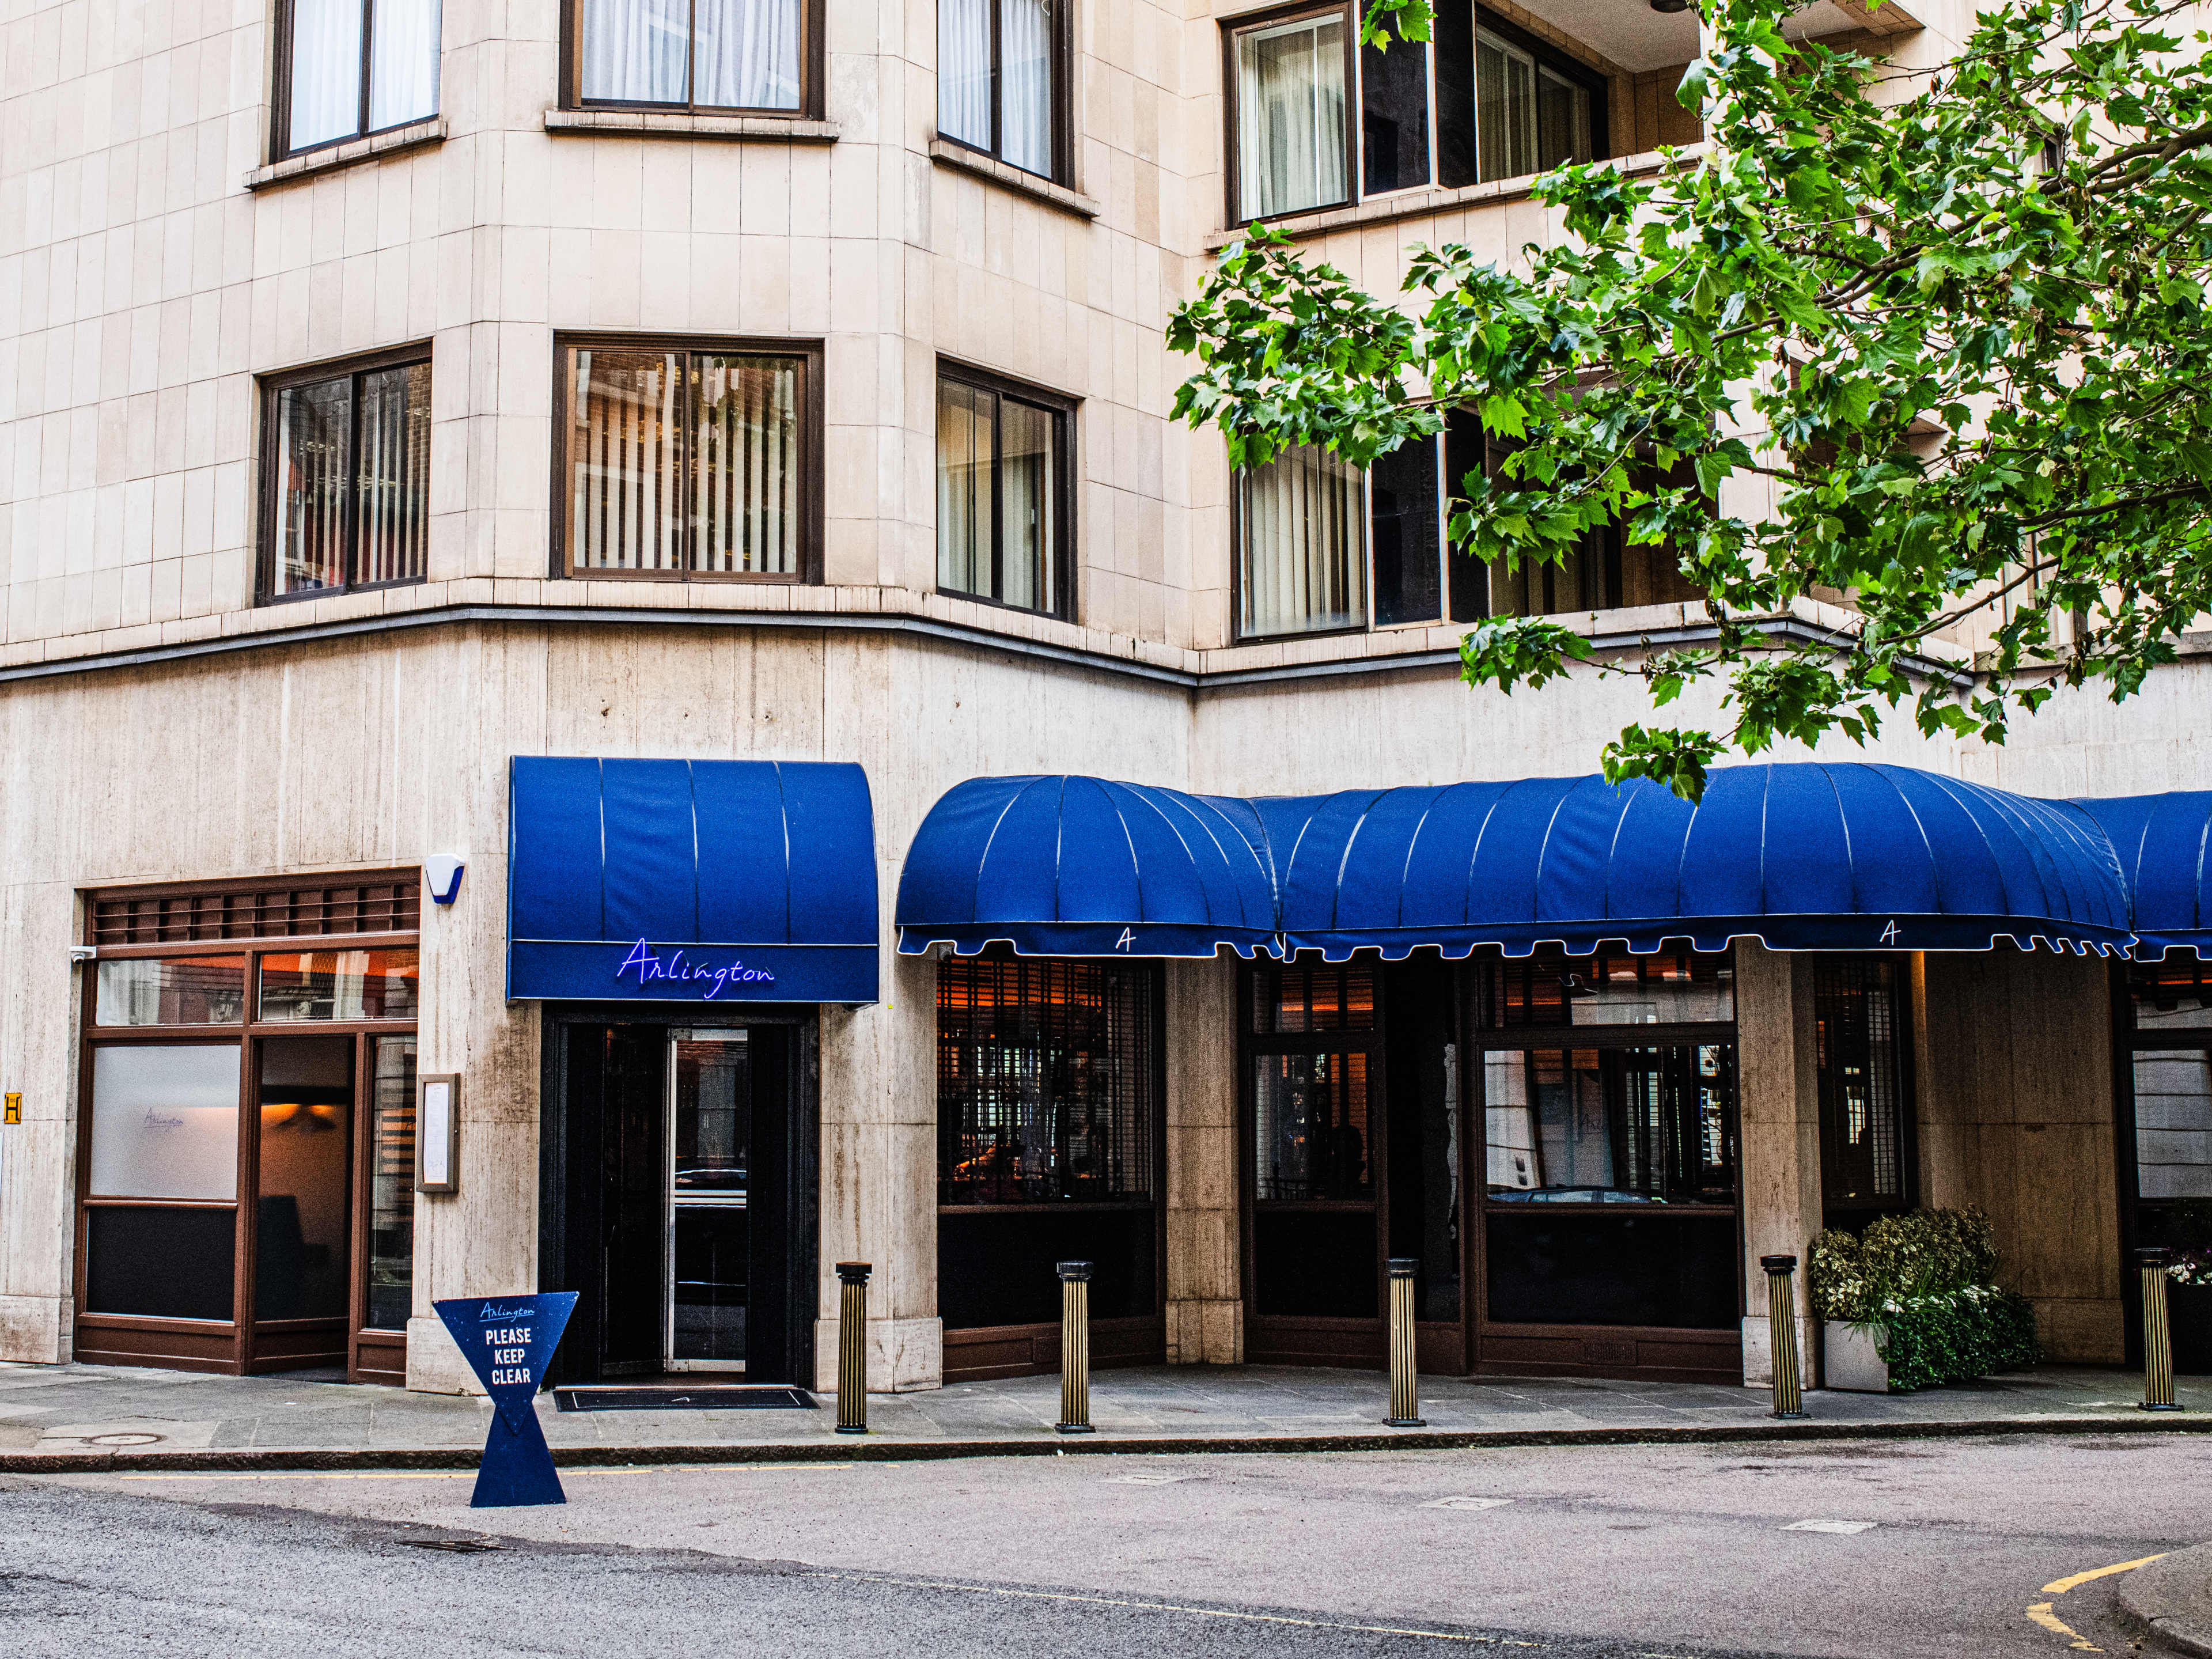 The exterior of Arlington with blue awnings.